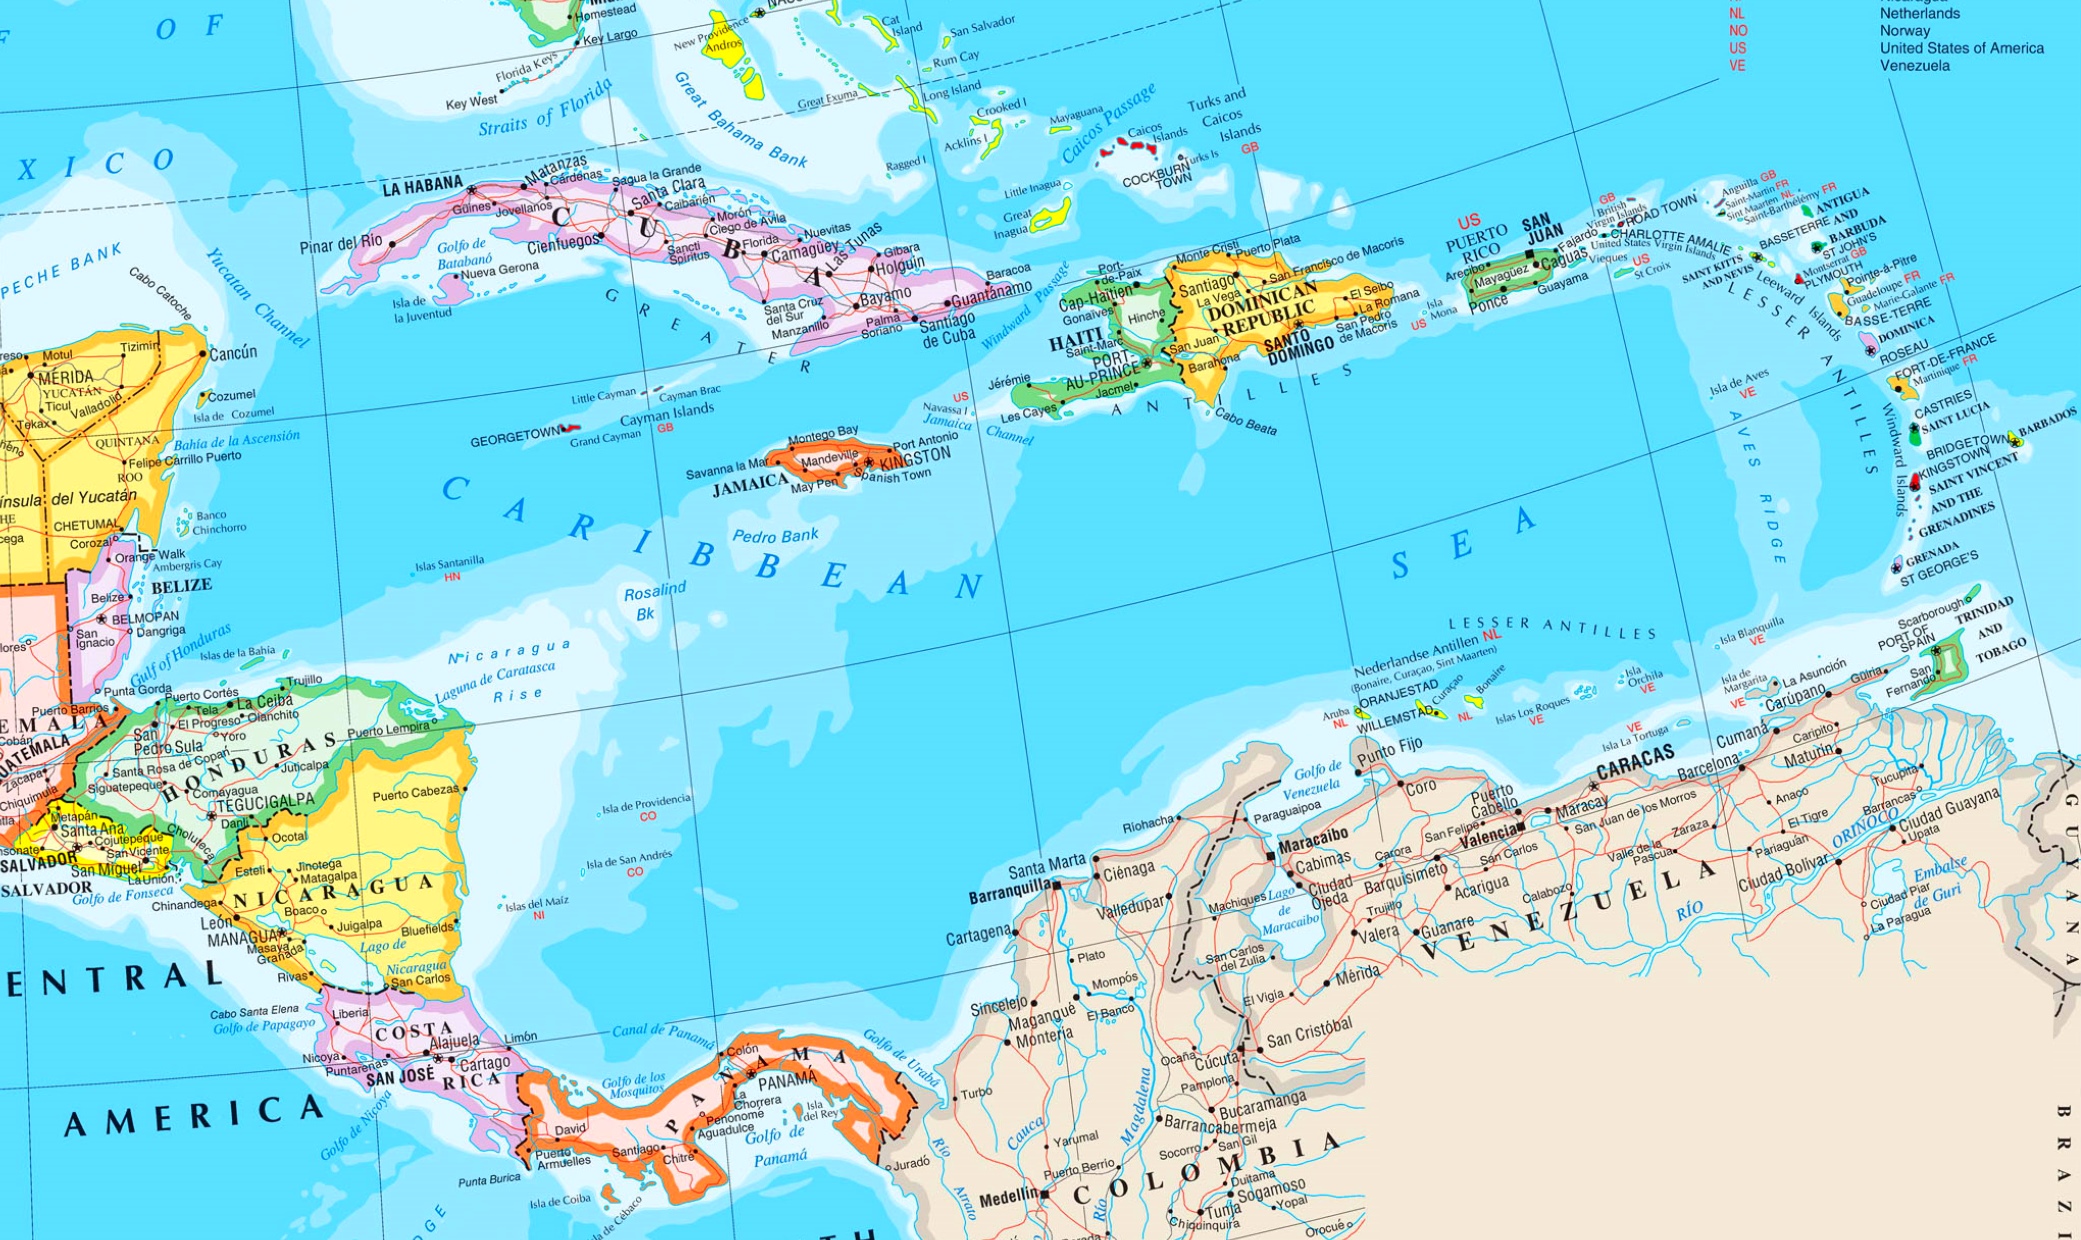 Picture Of The Caribbean Map